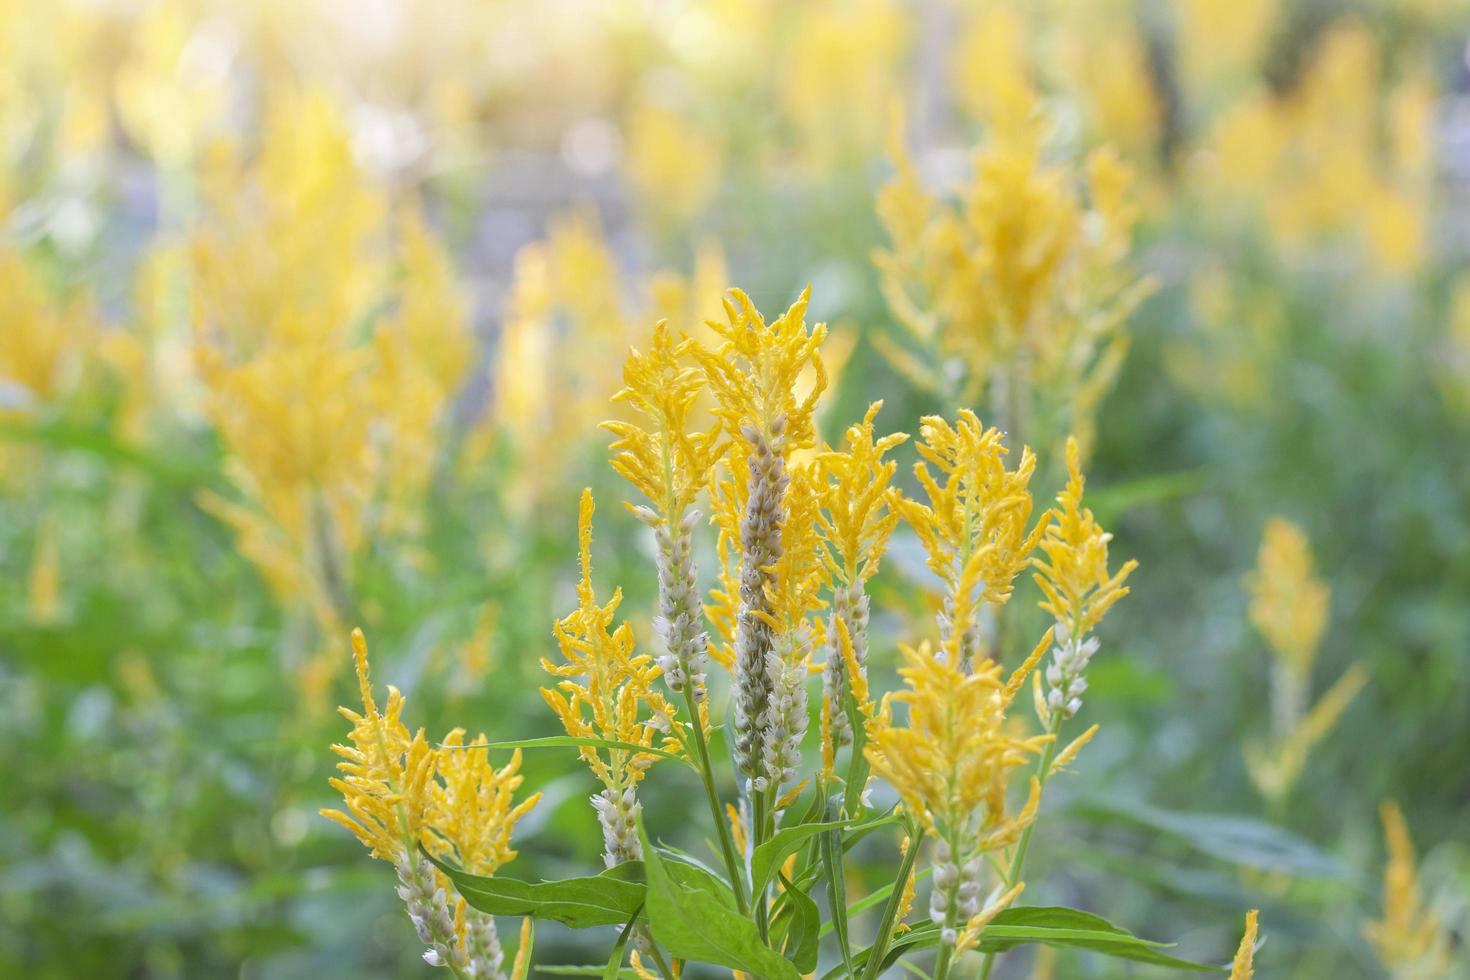 Yellow Celosia Plumosa or Castle Series bloom with sunlight in garden on blur nature background. photo